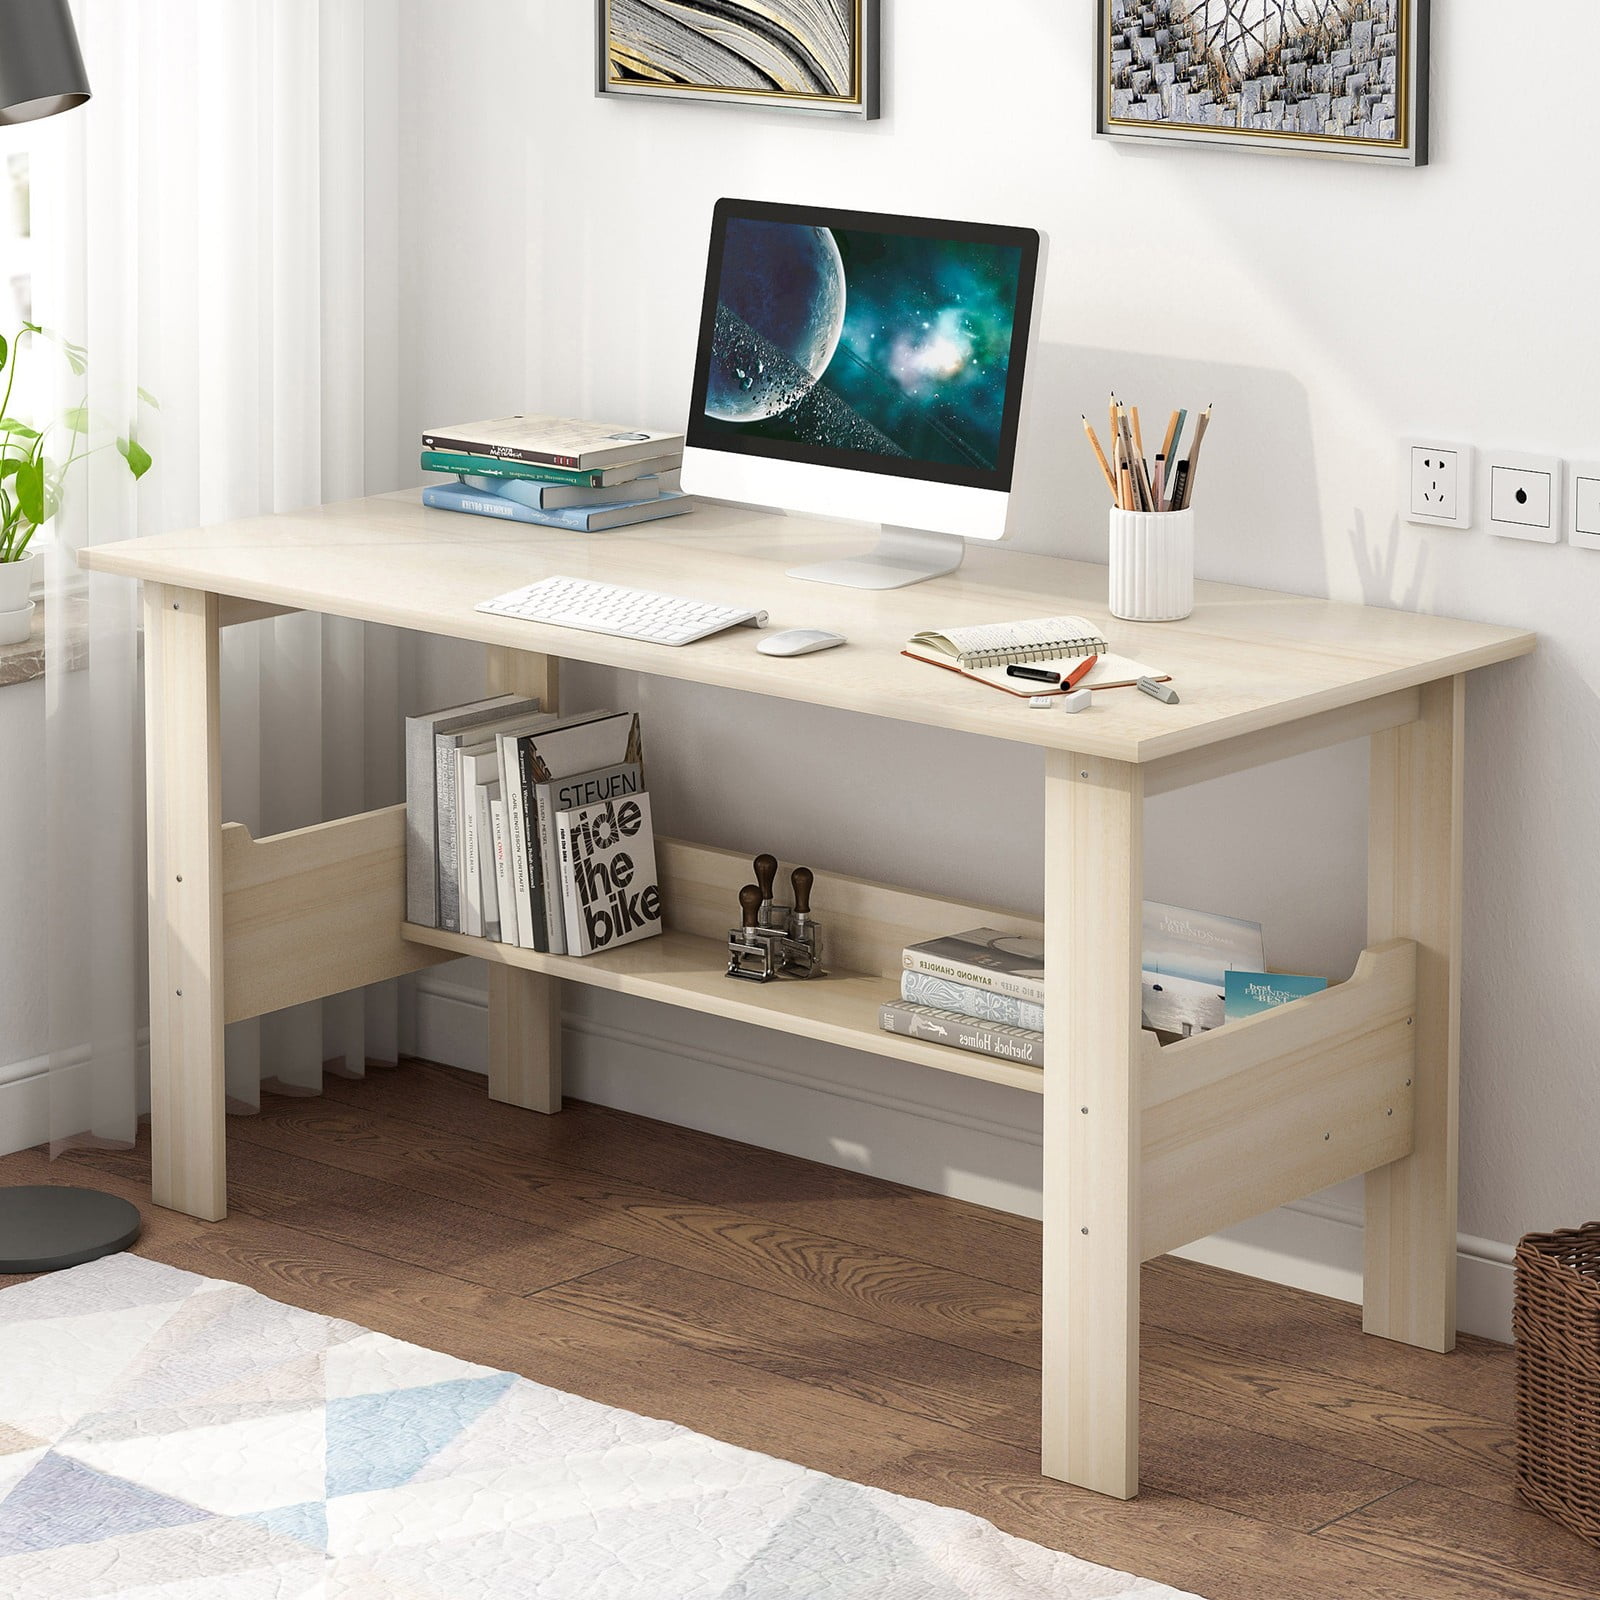 Details about   Computer Desk PC Laptop Table Study Workstation Wood Home Office Furniture white 